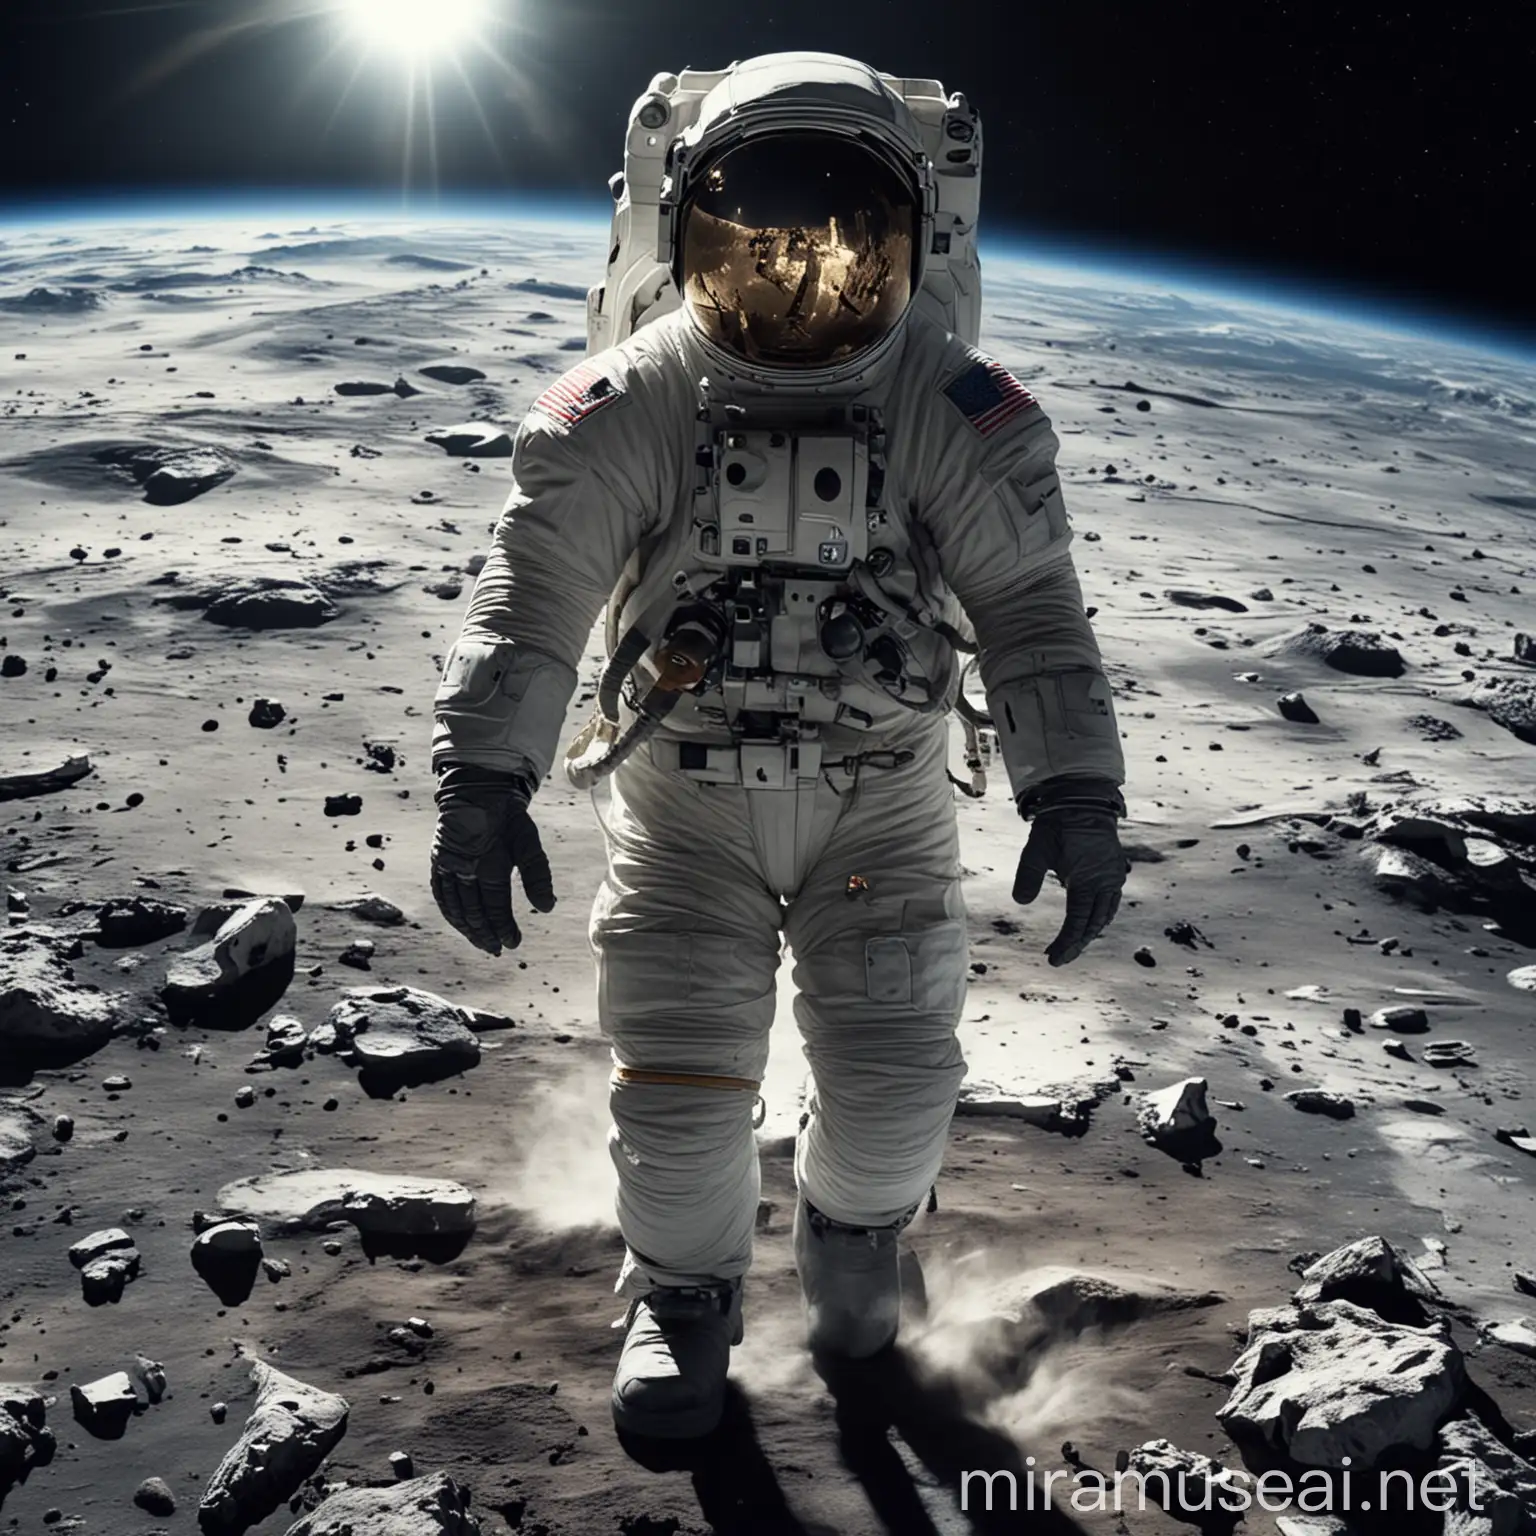 An astronaut is walking in the space: the earth is at the back of the spacecraft:ultra hd photos:detail the astronauts.